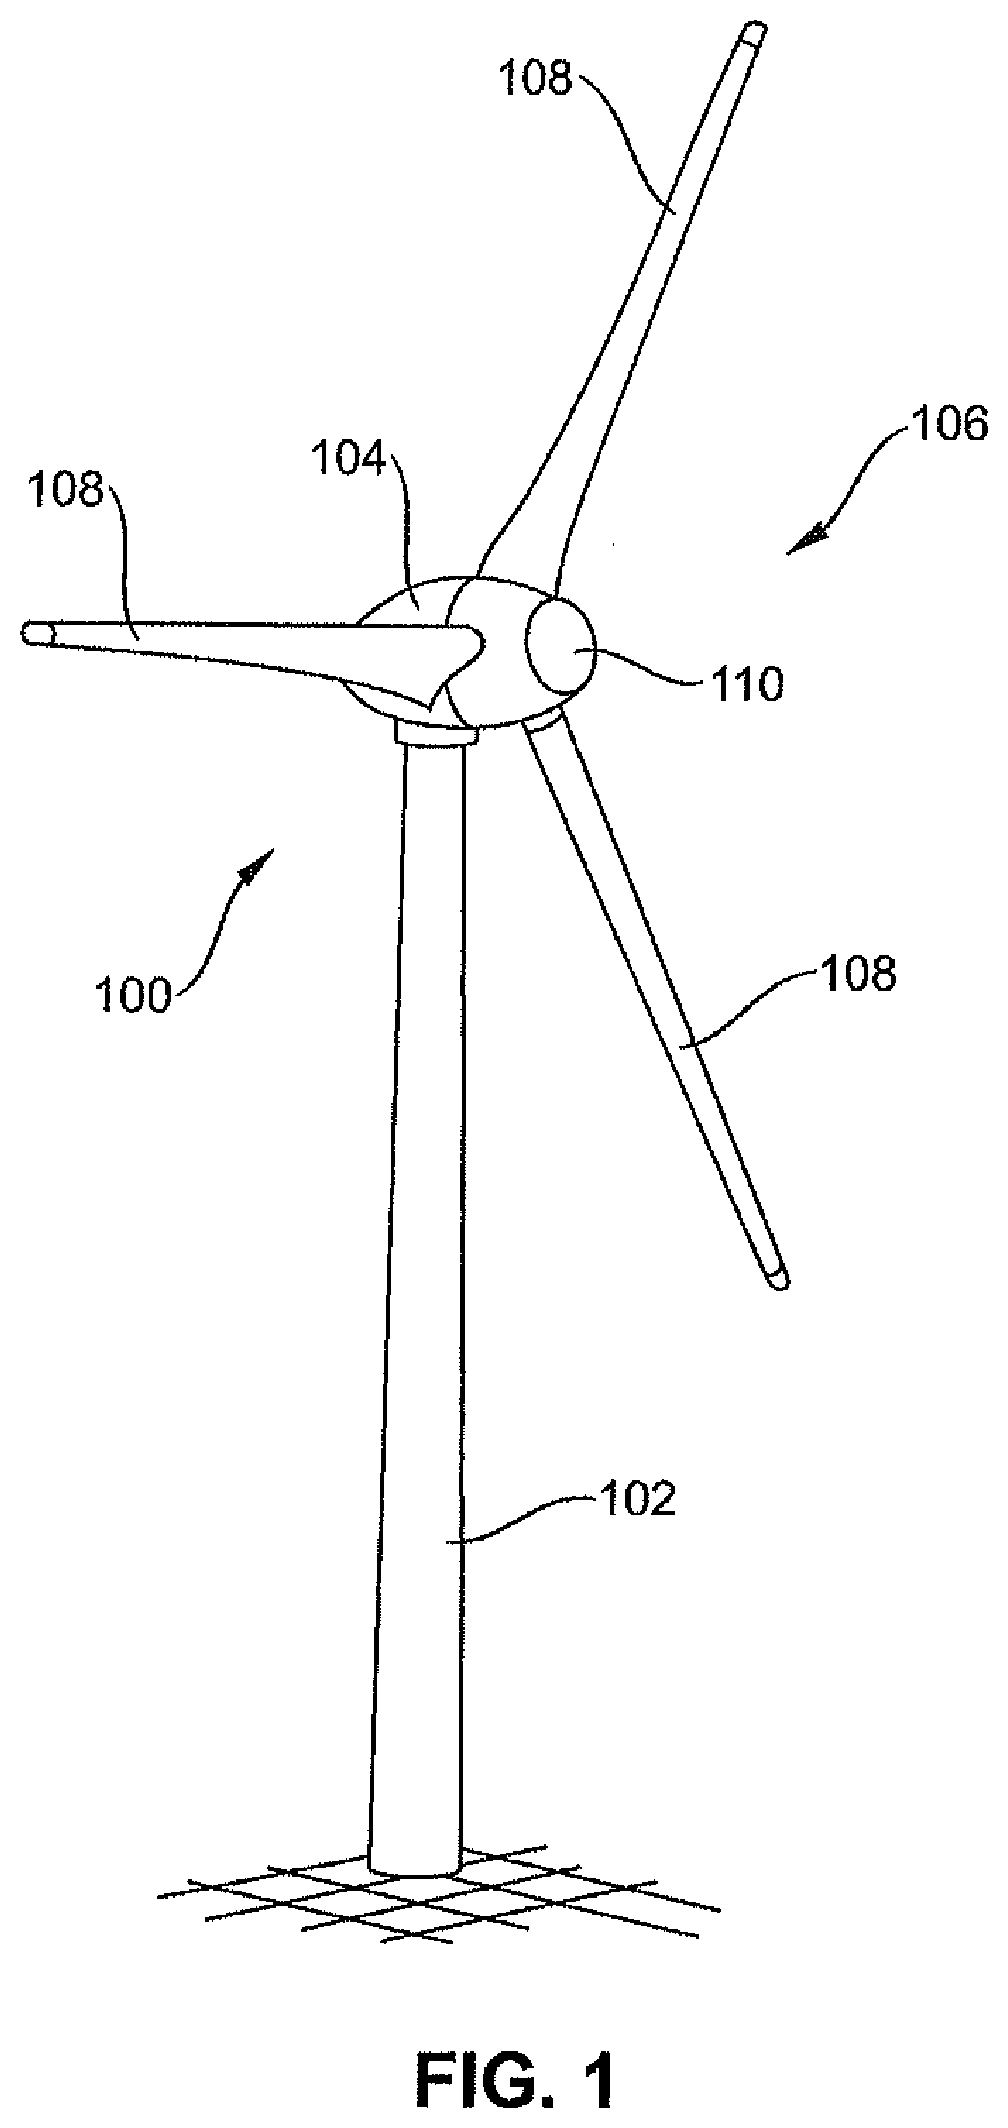 Rotor hub of a wind turbine, and method for assembling such a rotor hub